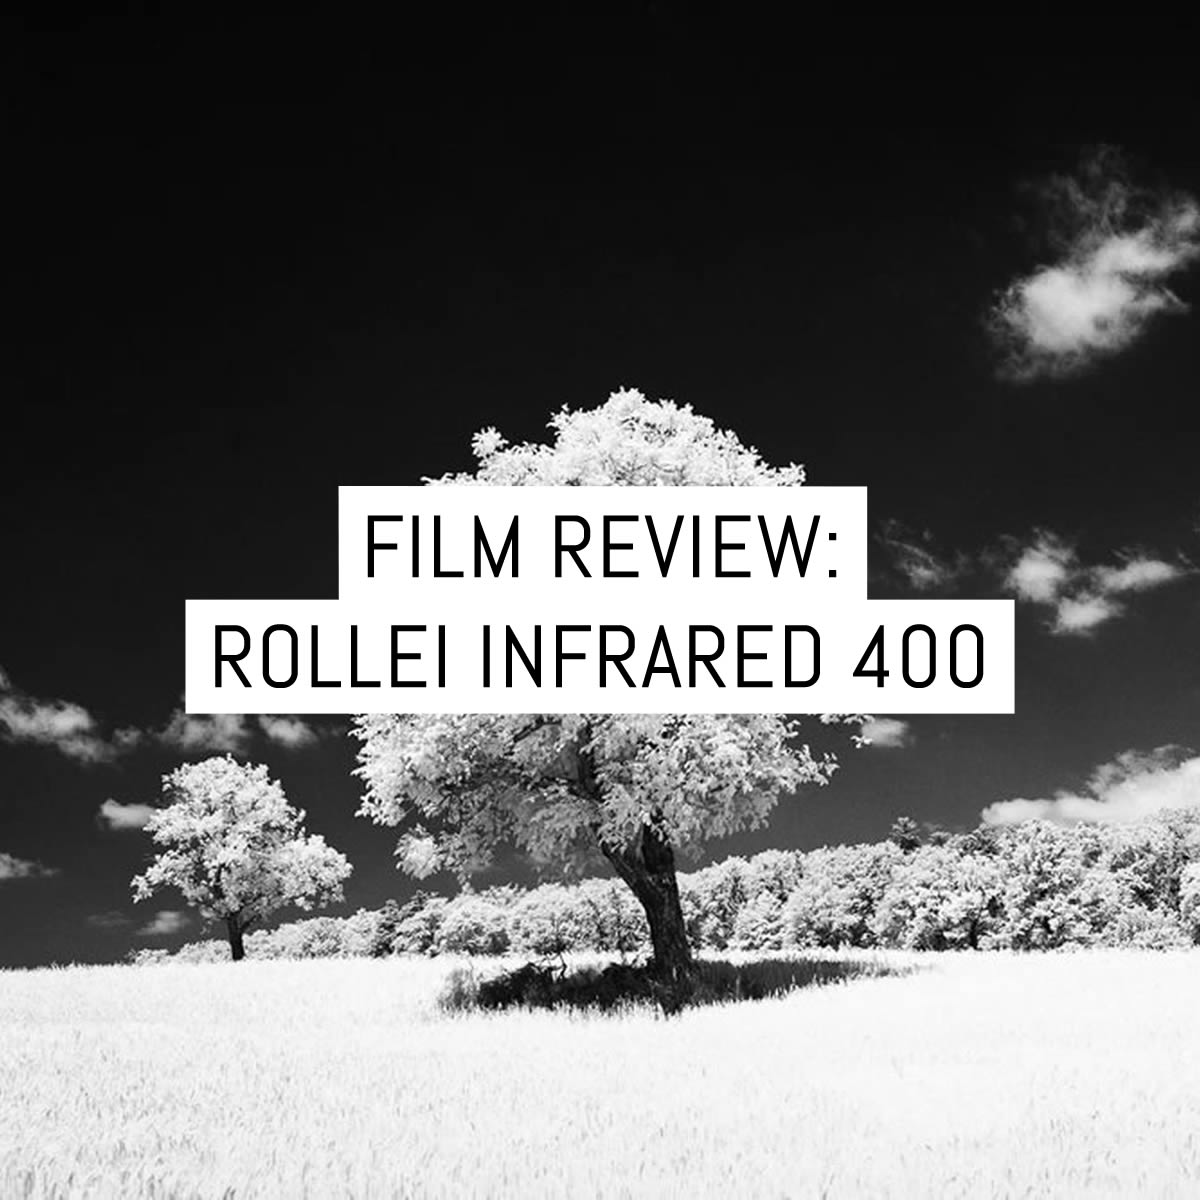 Film stock review: Rollei Infrared 400